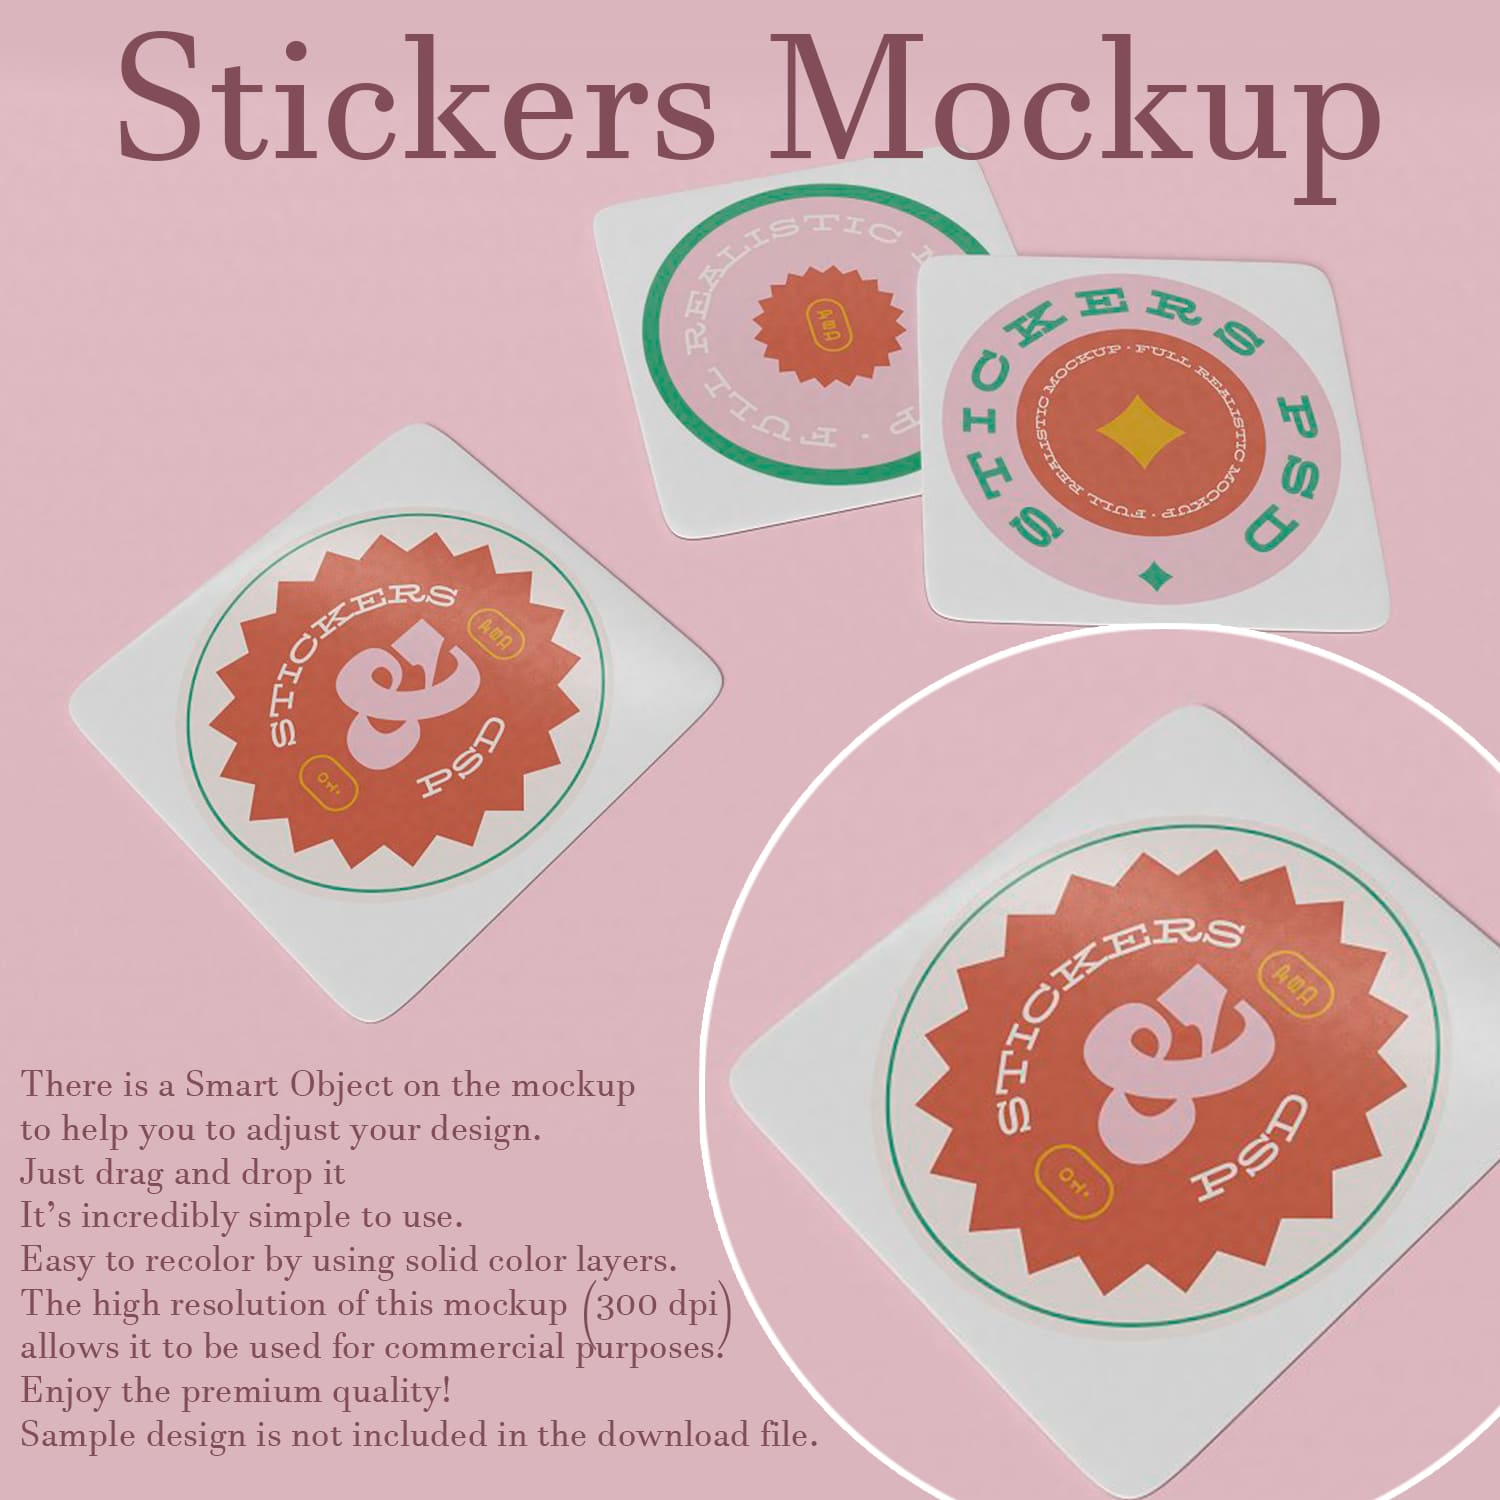 Image with gorgeous round stickers on pink background.